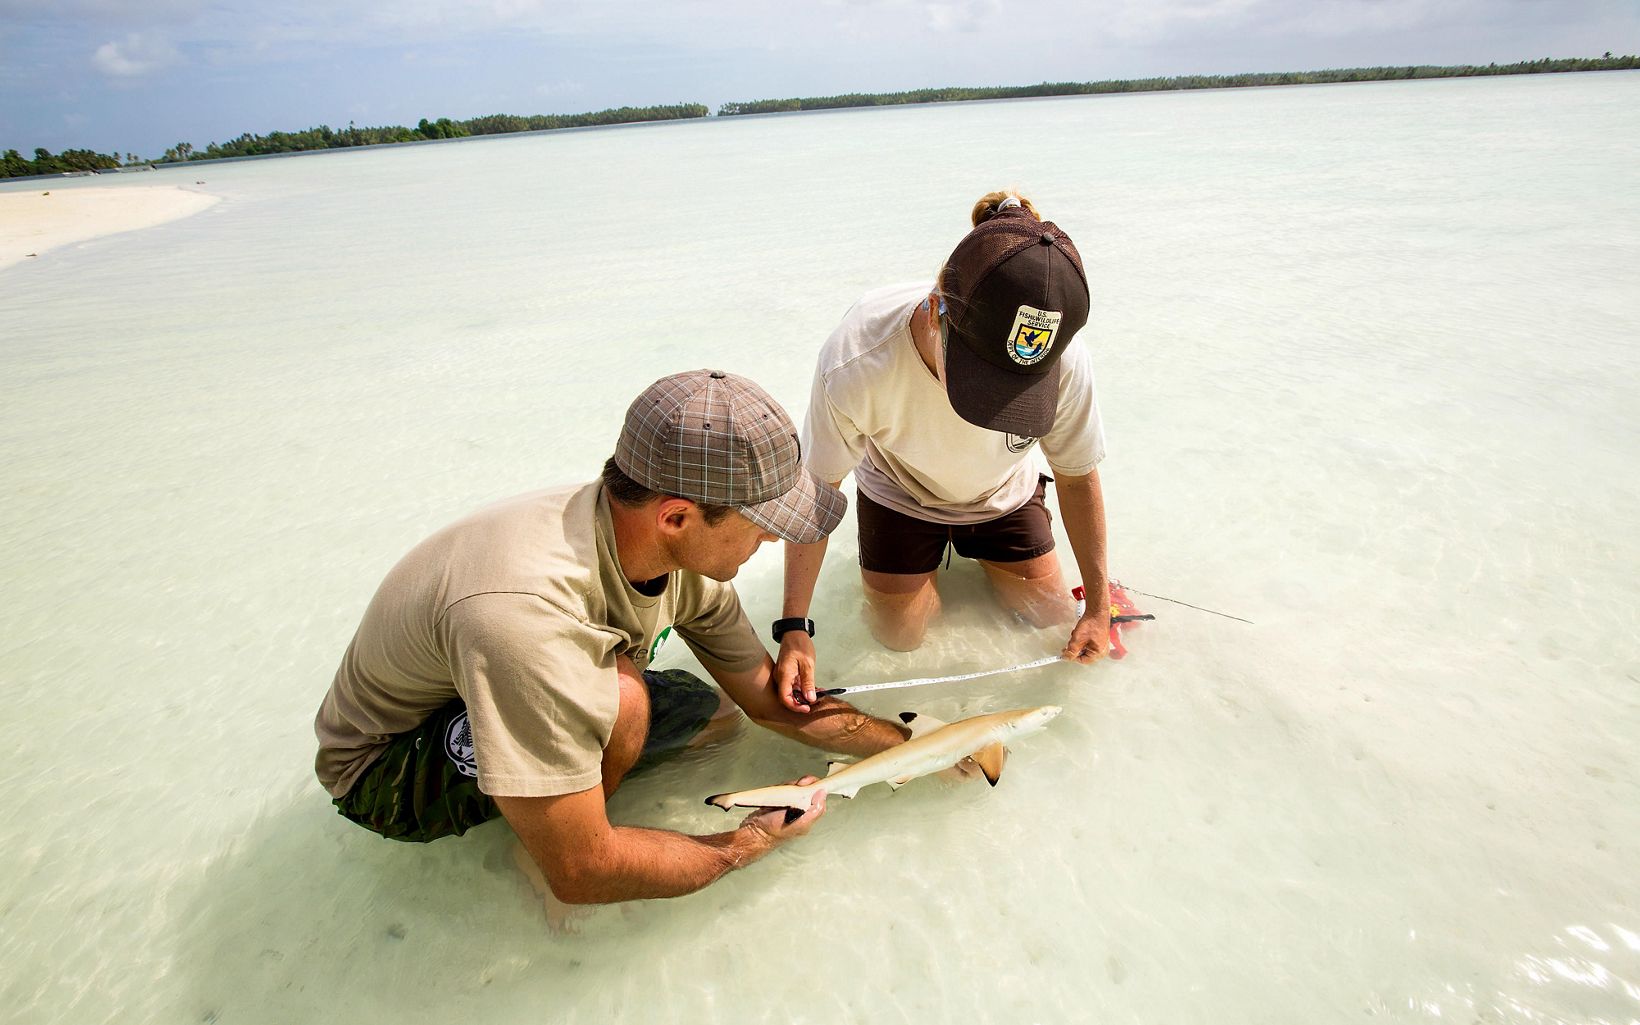 Studying a blacktip reef shark Conservancy staff Kydd Pollock and Amanda Meyer catch and measure a juvenile shark. © Tim Calver / The Nature Conservancy